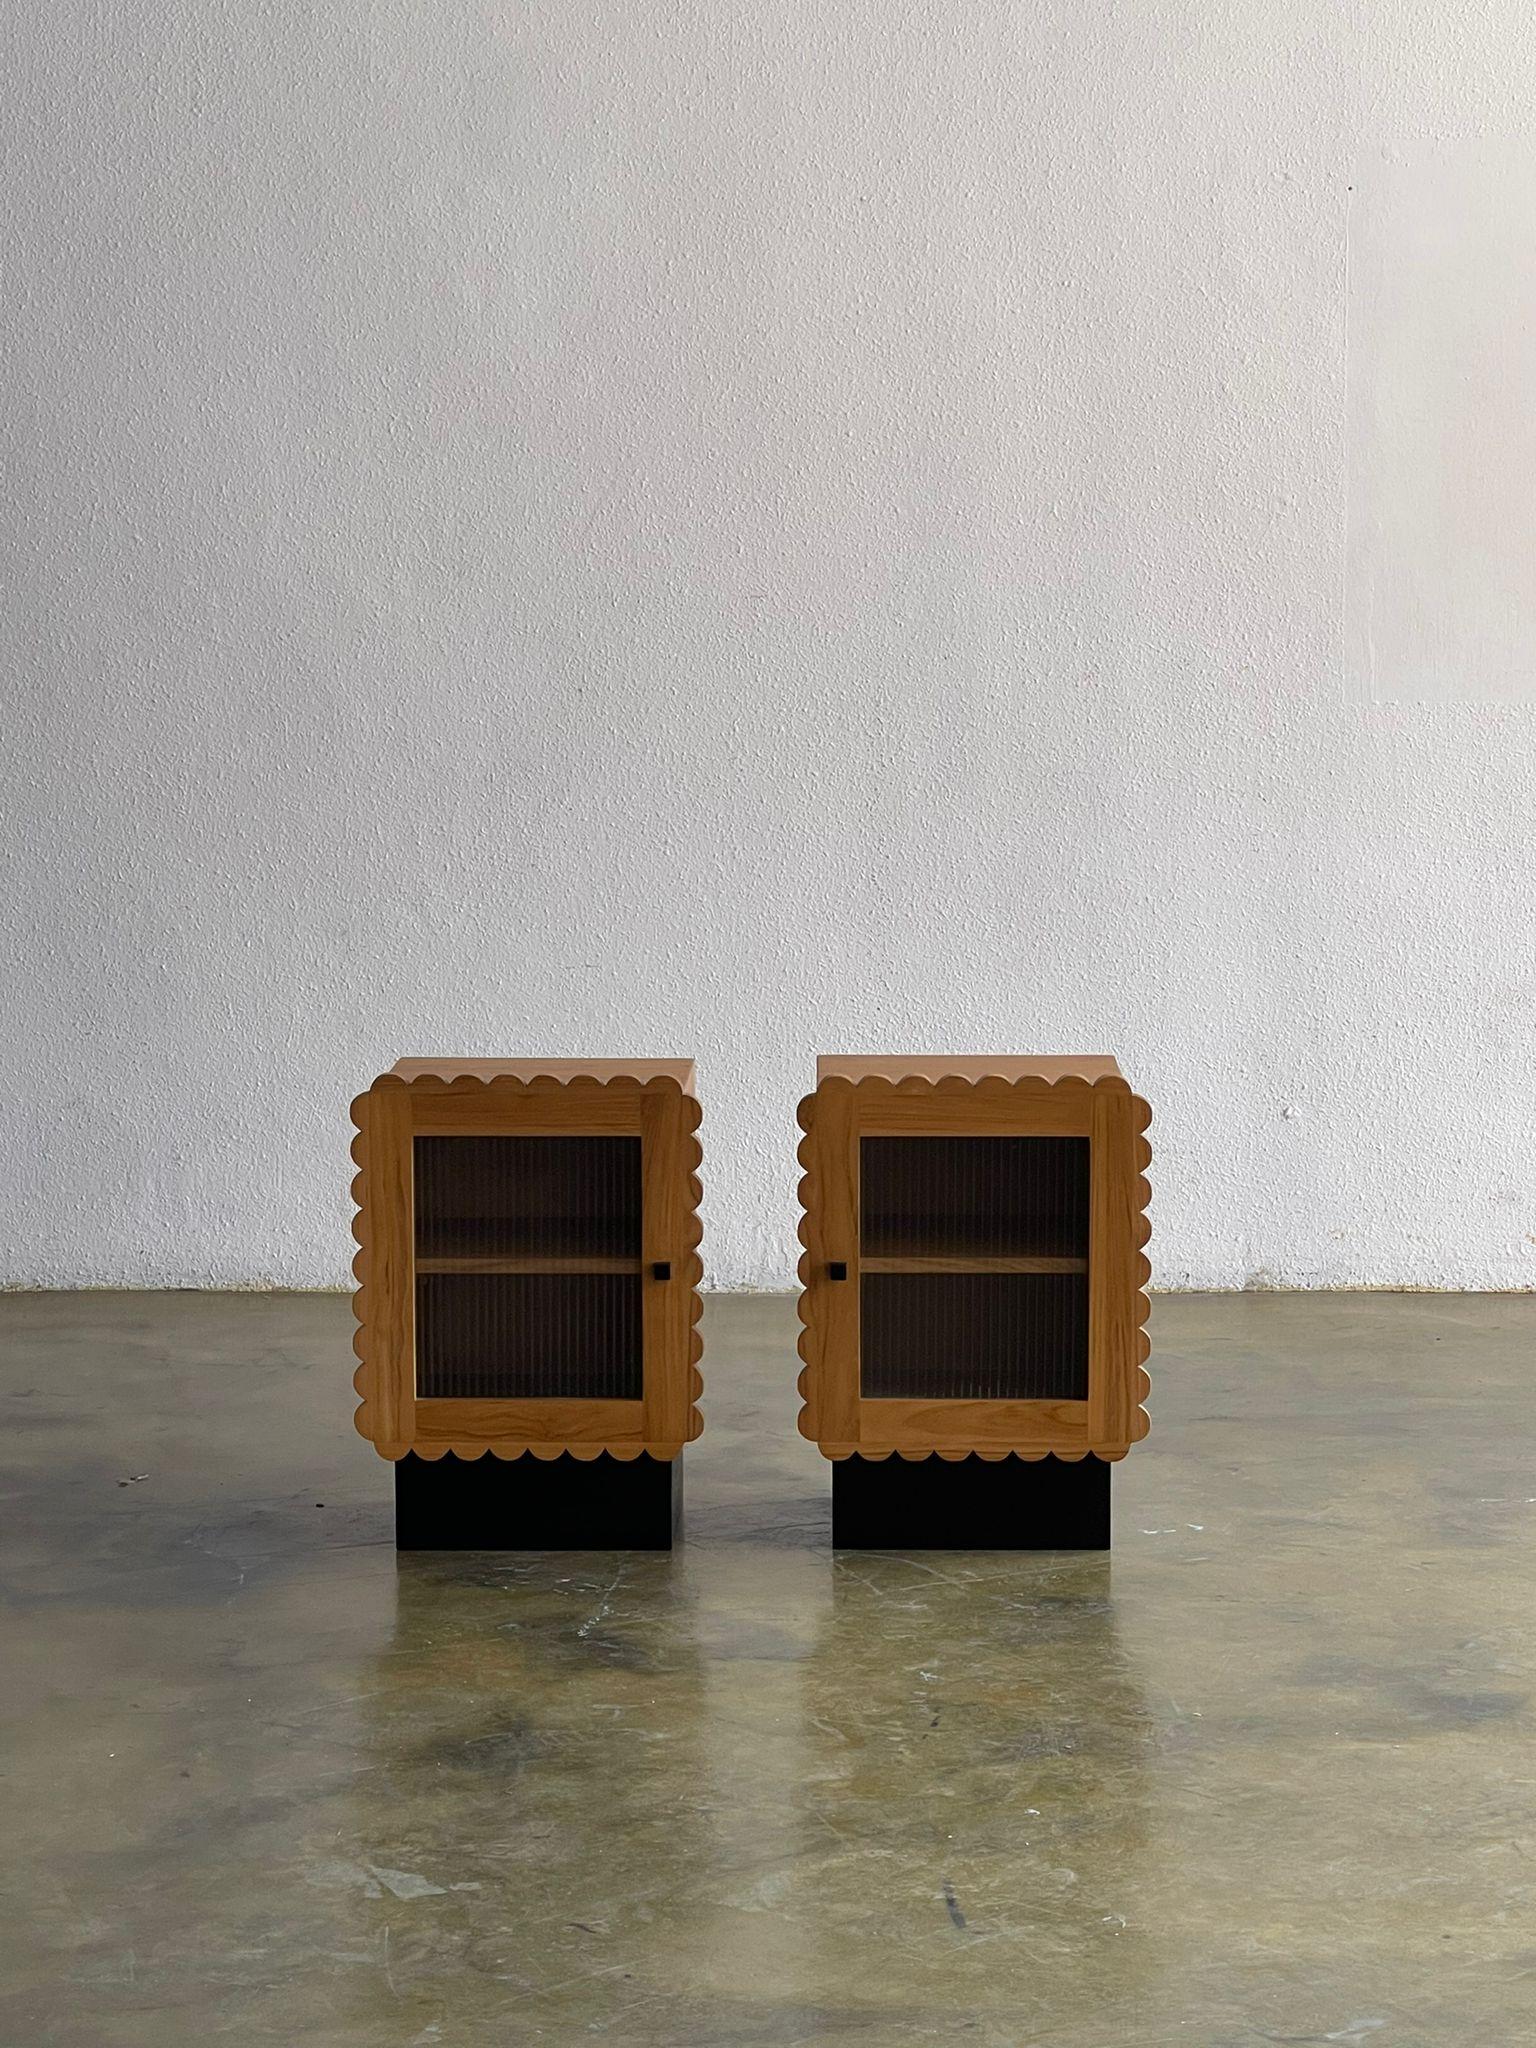 Mamun No.2 Side Table by Studio Kallang
Dimensions: W 45 x D 35 x H 62.5 cm
Materials: Solid Teak, Fluted Glass. 

STUDIO KALLANG IS A SINGAPORE AND SEATTLE BASED PROJECT FOCUSING ON OBJECTS DESIGNED BY FAEZAH SHAHARUDDIN.
PIECES ARE PLAYFUL